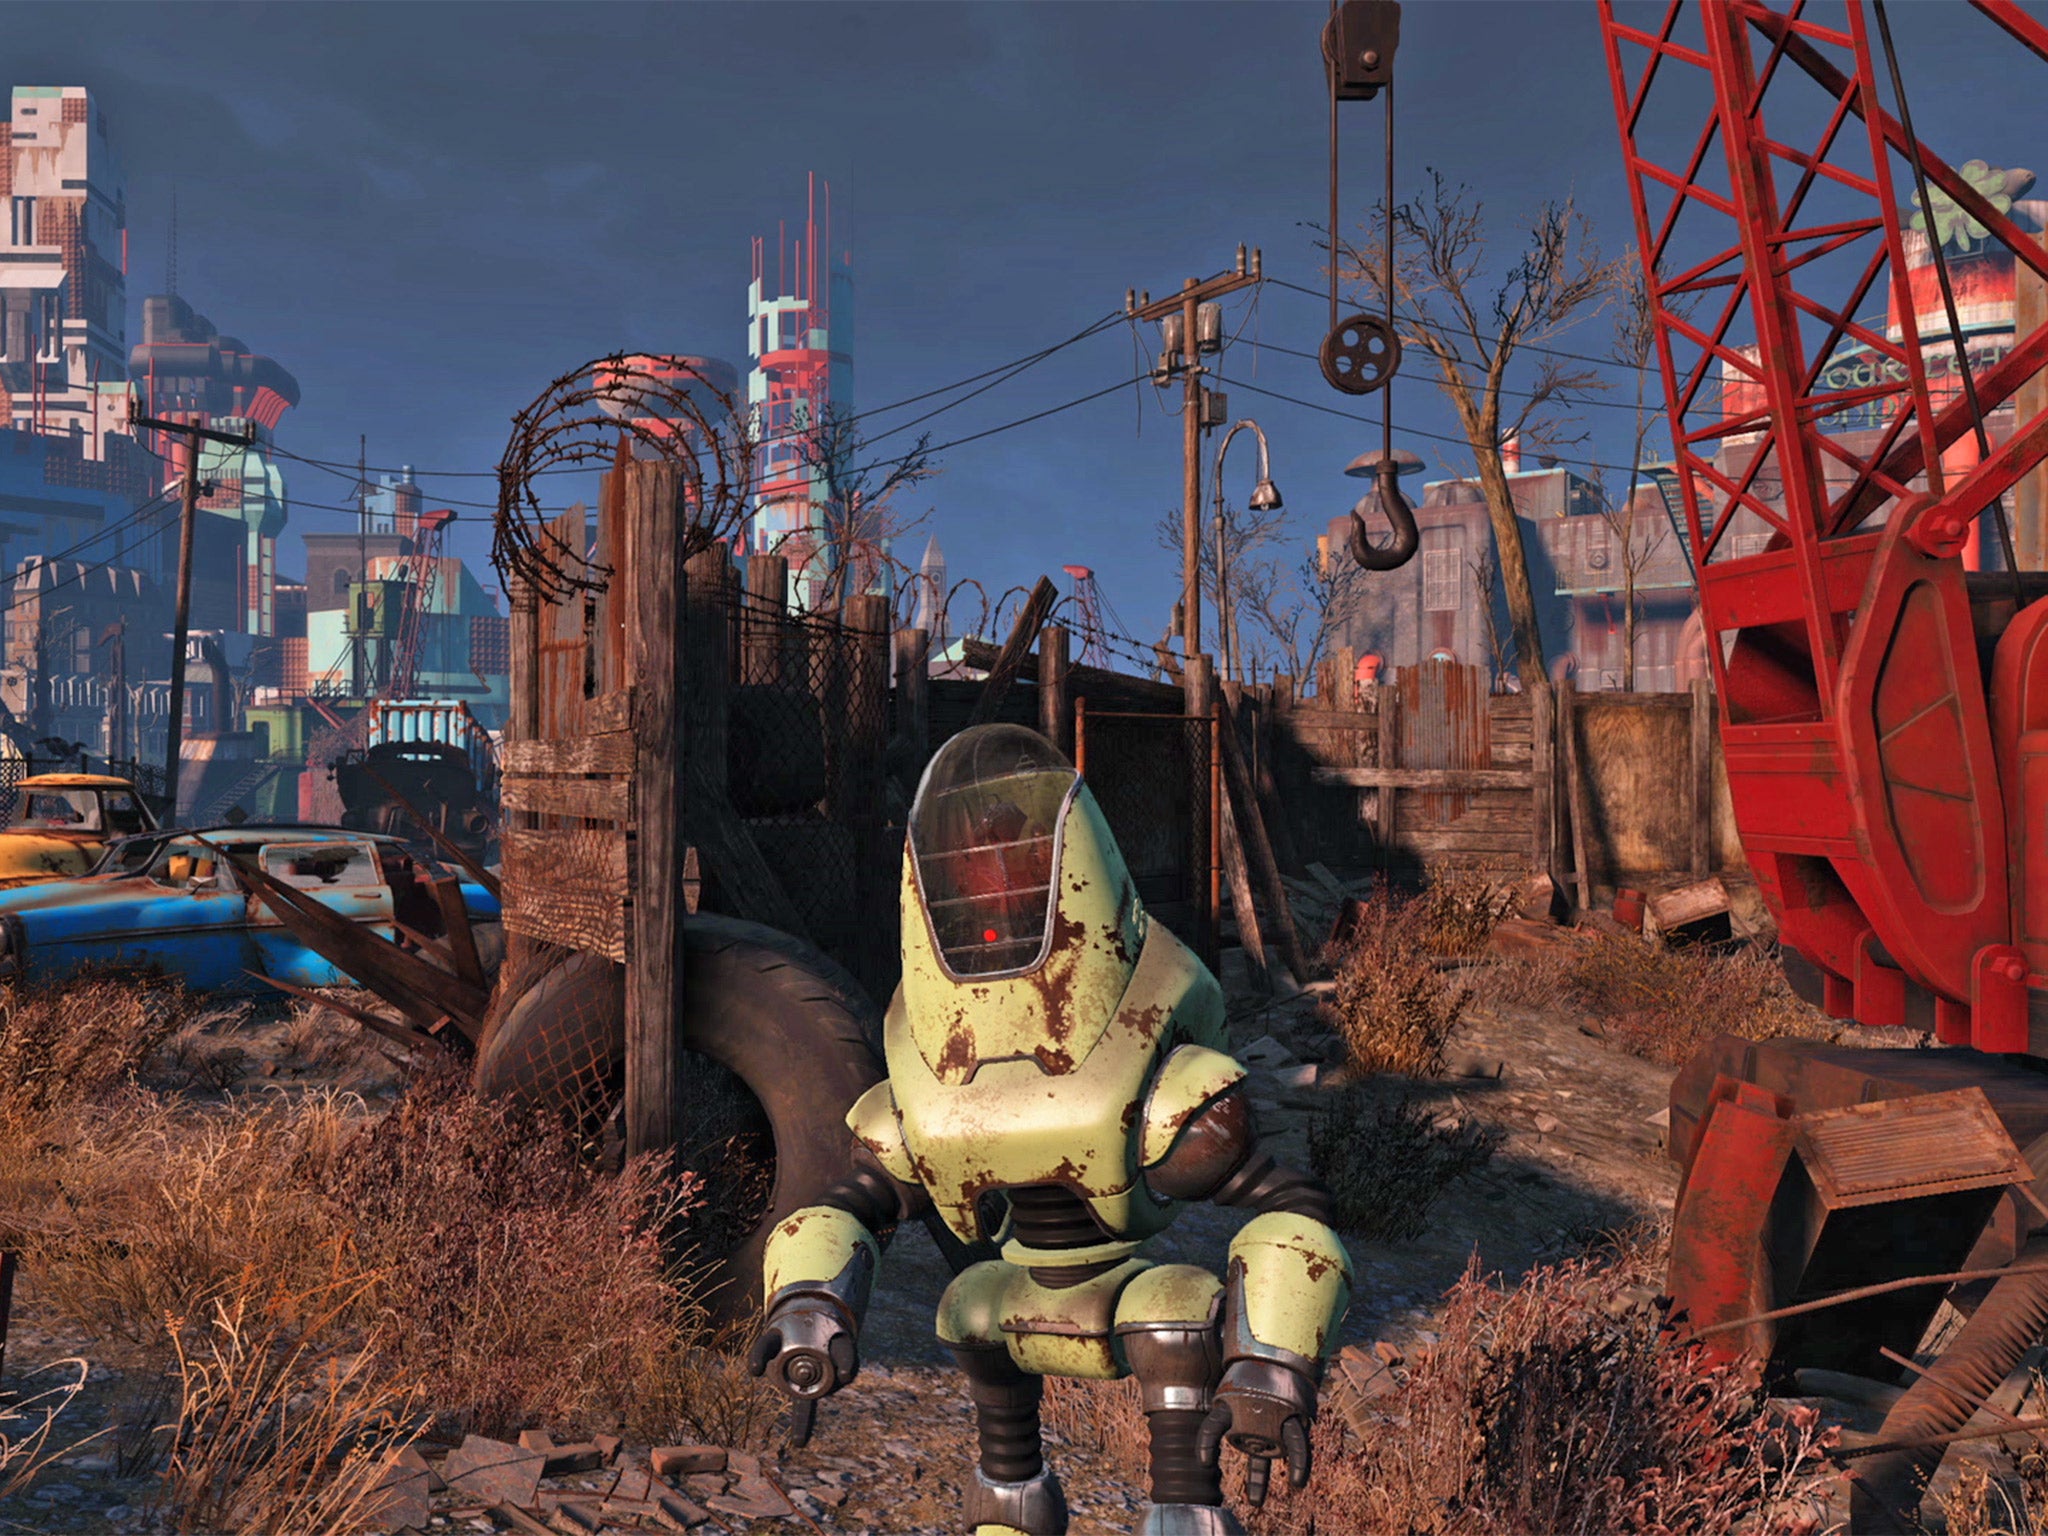 ‘Fallout 4’ is set 200 years after a nuclear holocaust